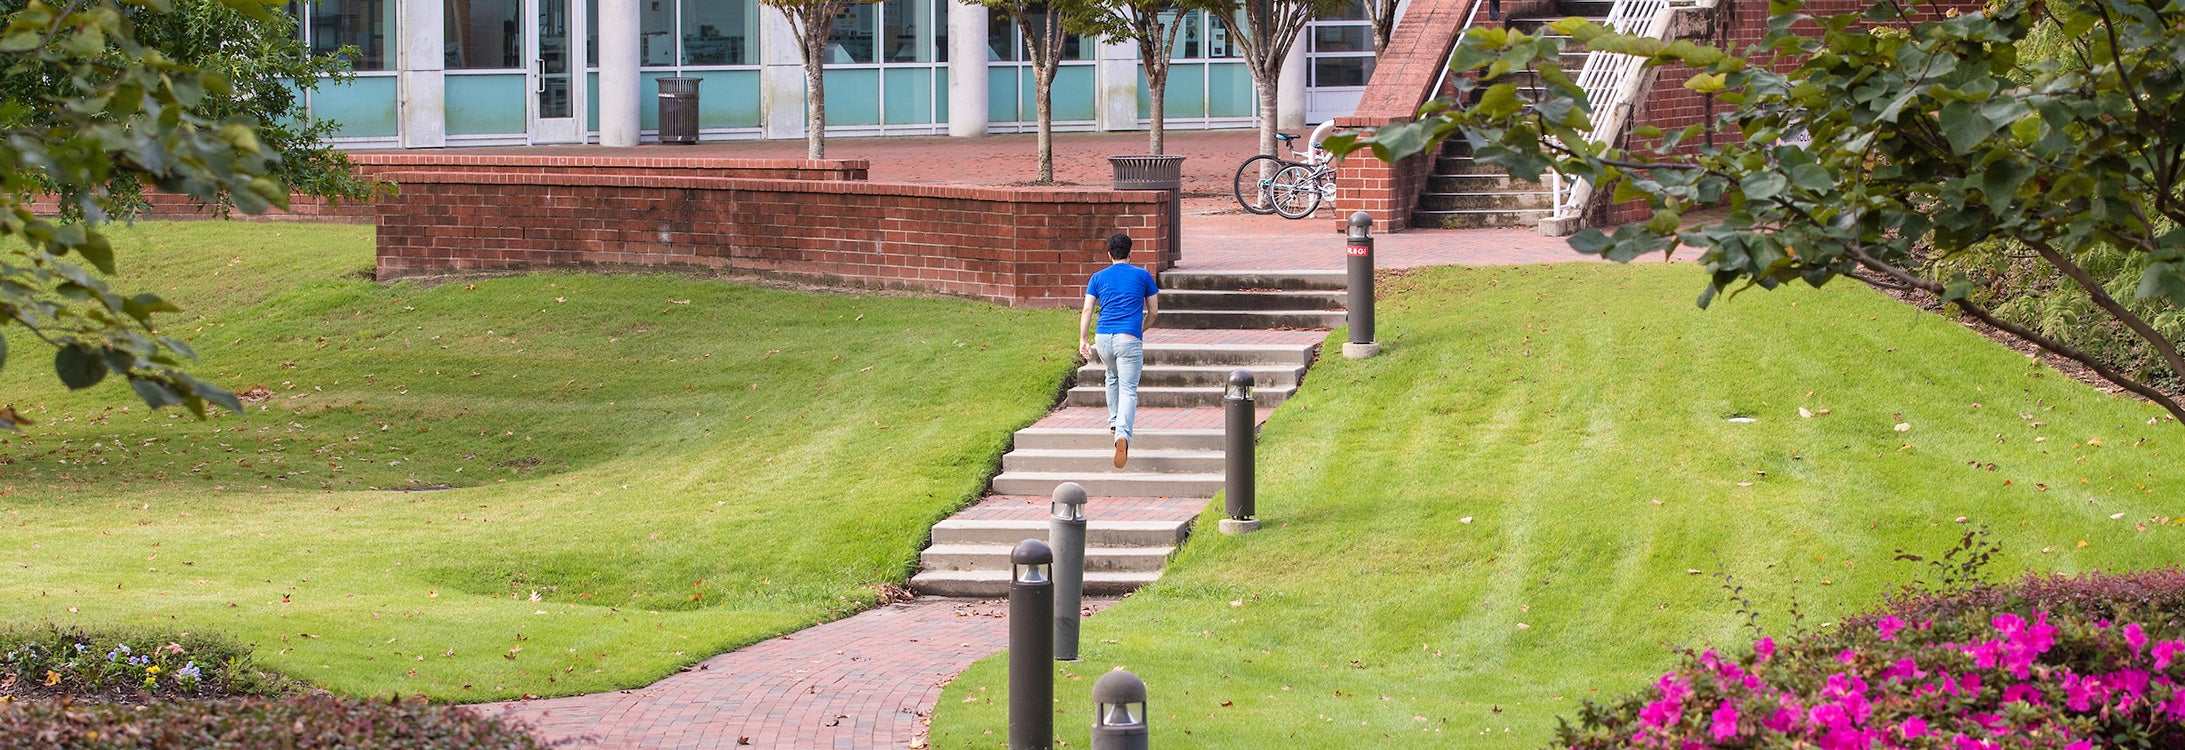 Student walking up the stairs